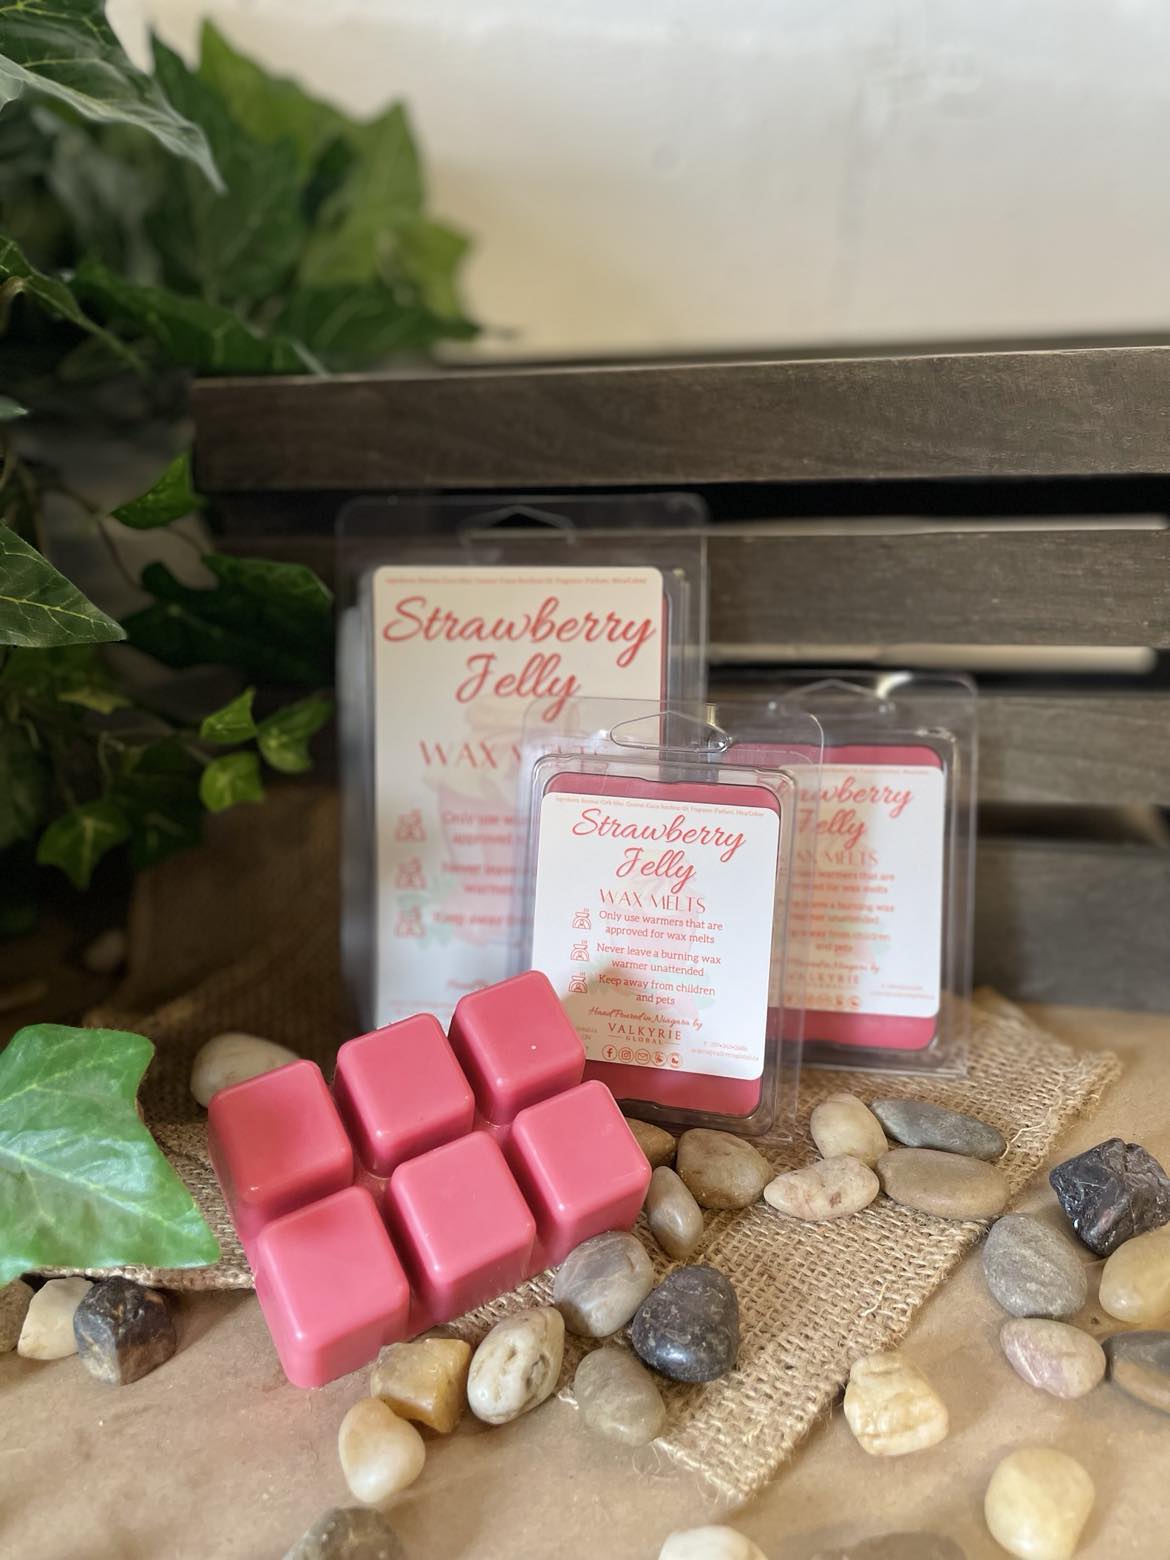 Strawberry Jelly - Wax Melts Valkyrie Global Natural Skin Care Self Care  Beauty St. Catharines Ontario Canada